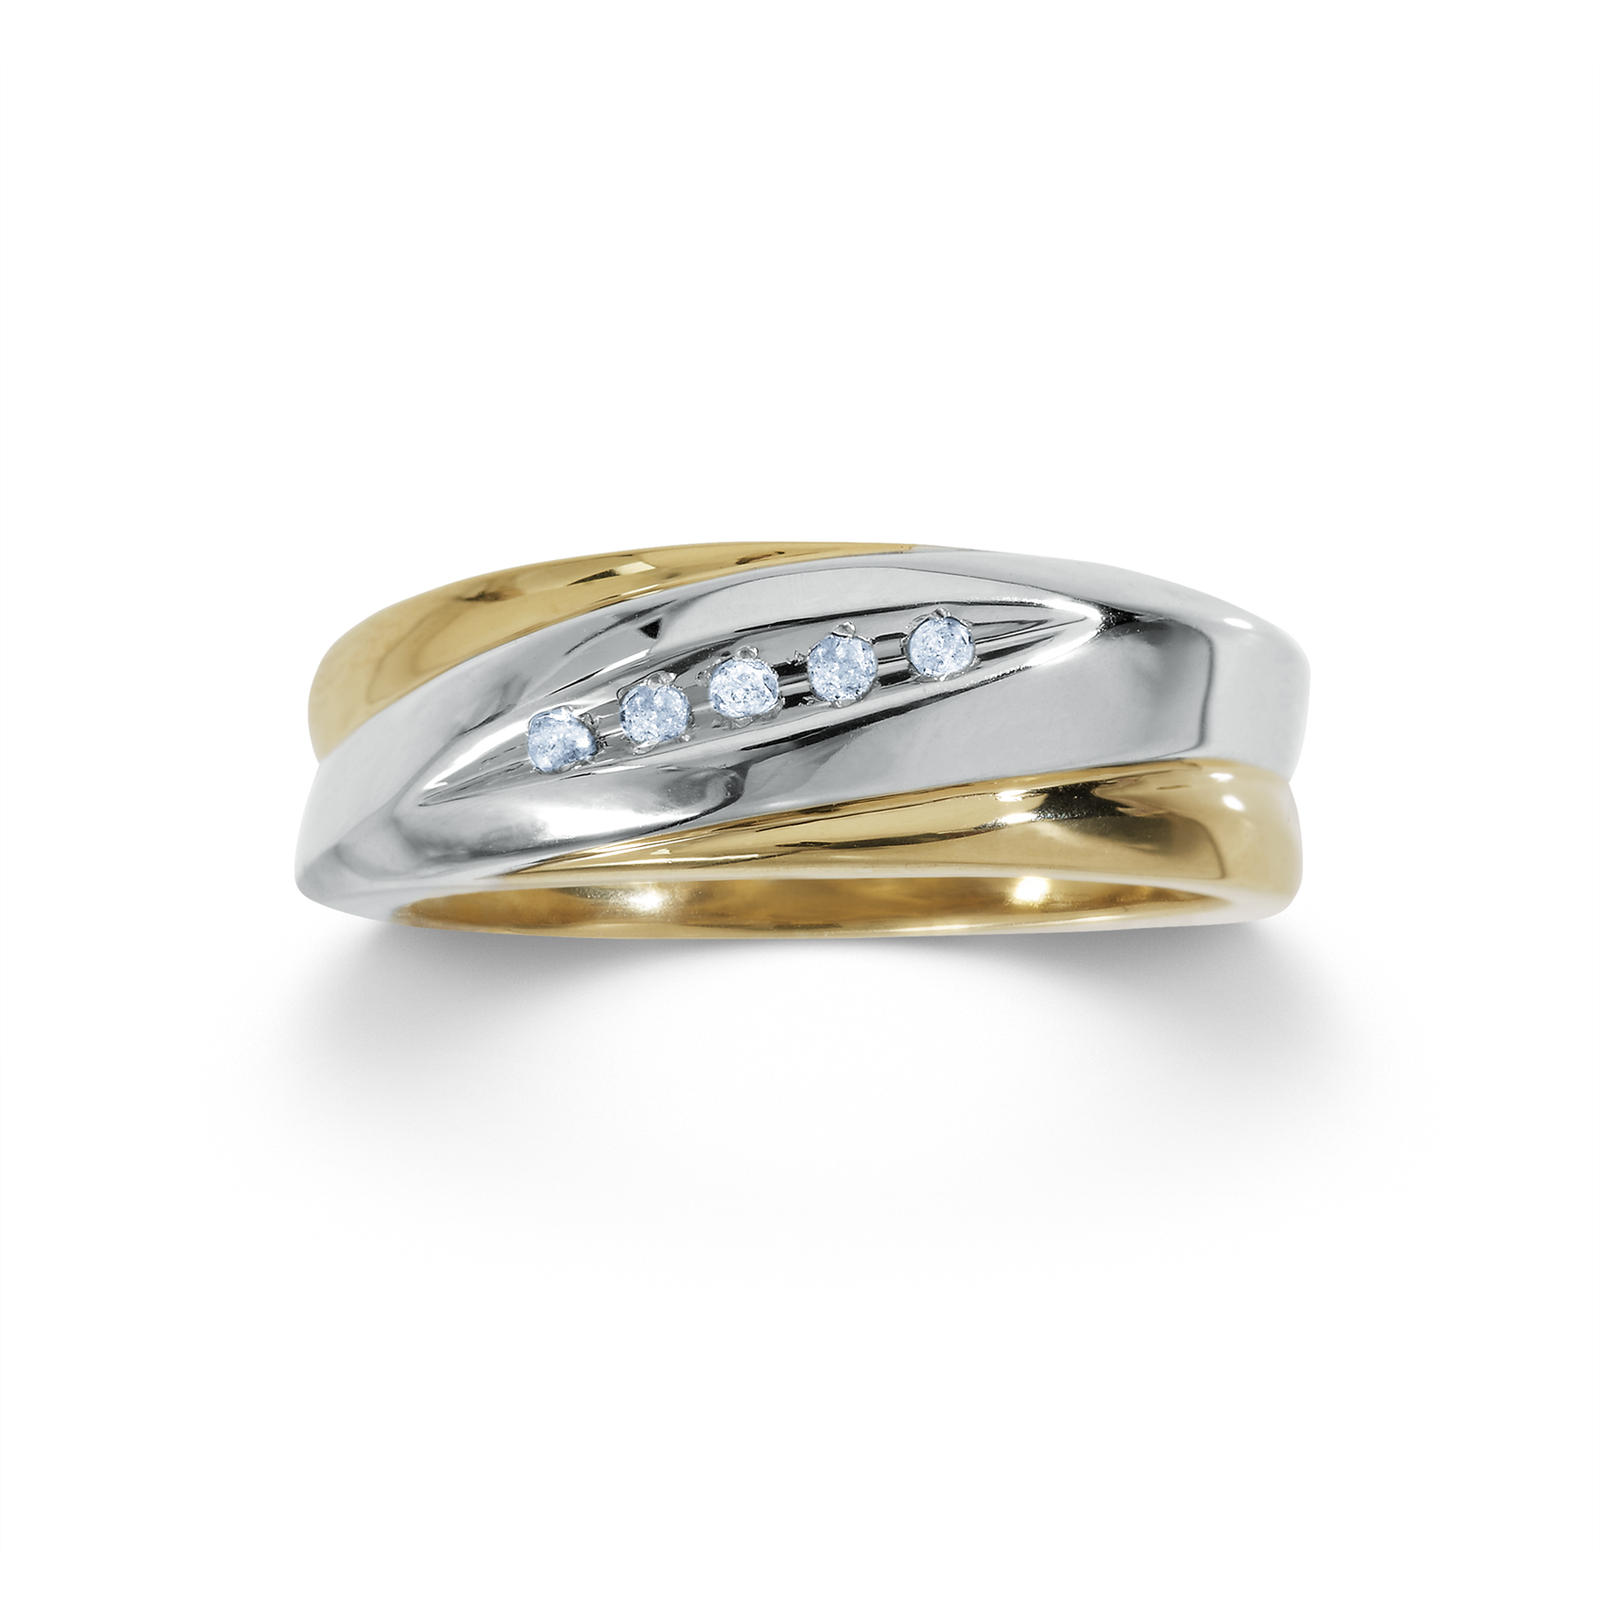 18K Gold over Sterling Silver Mens Wedding Band with Diamond Accents